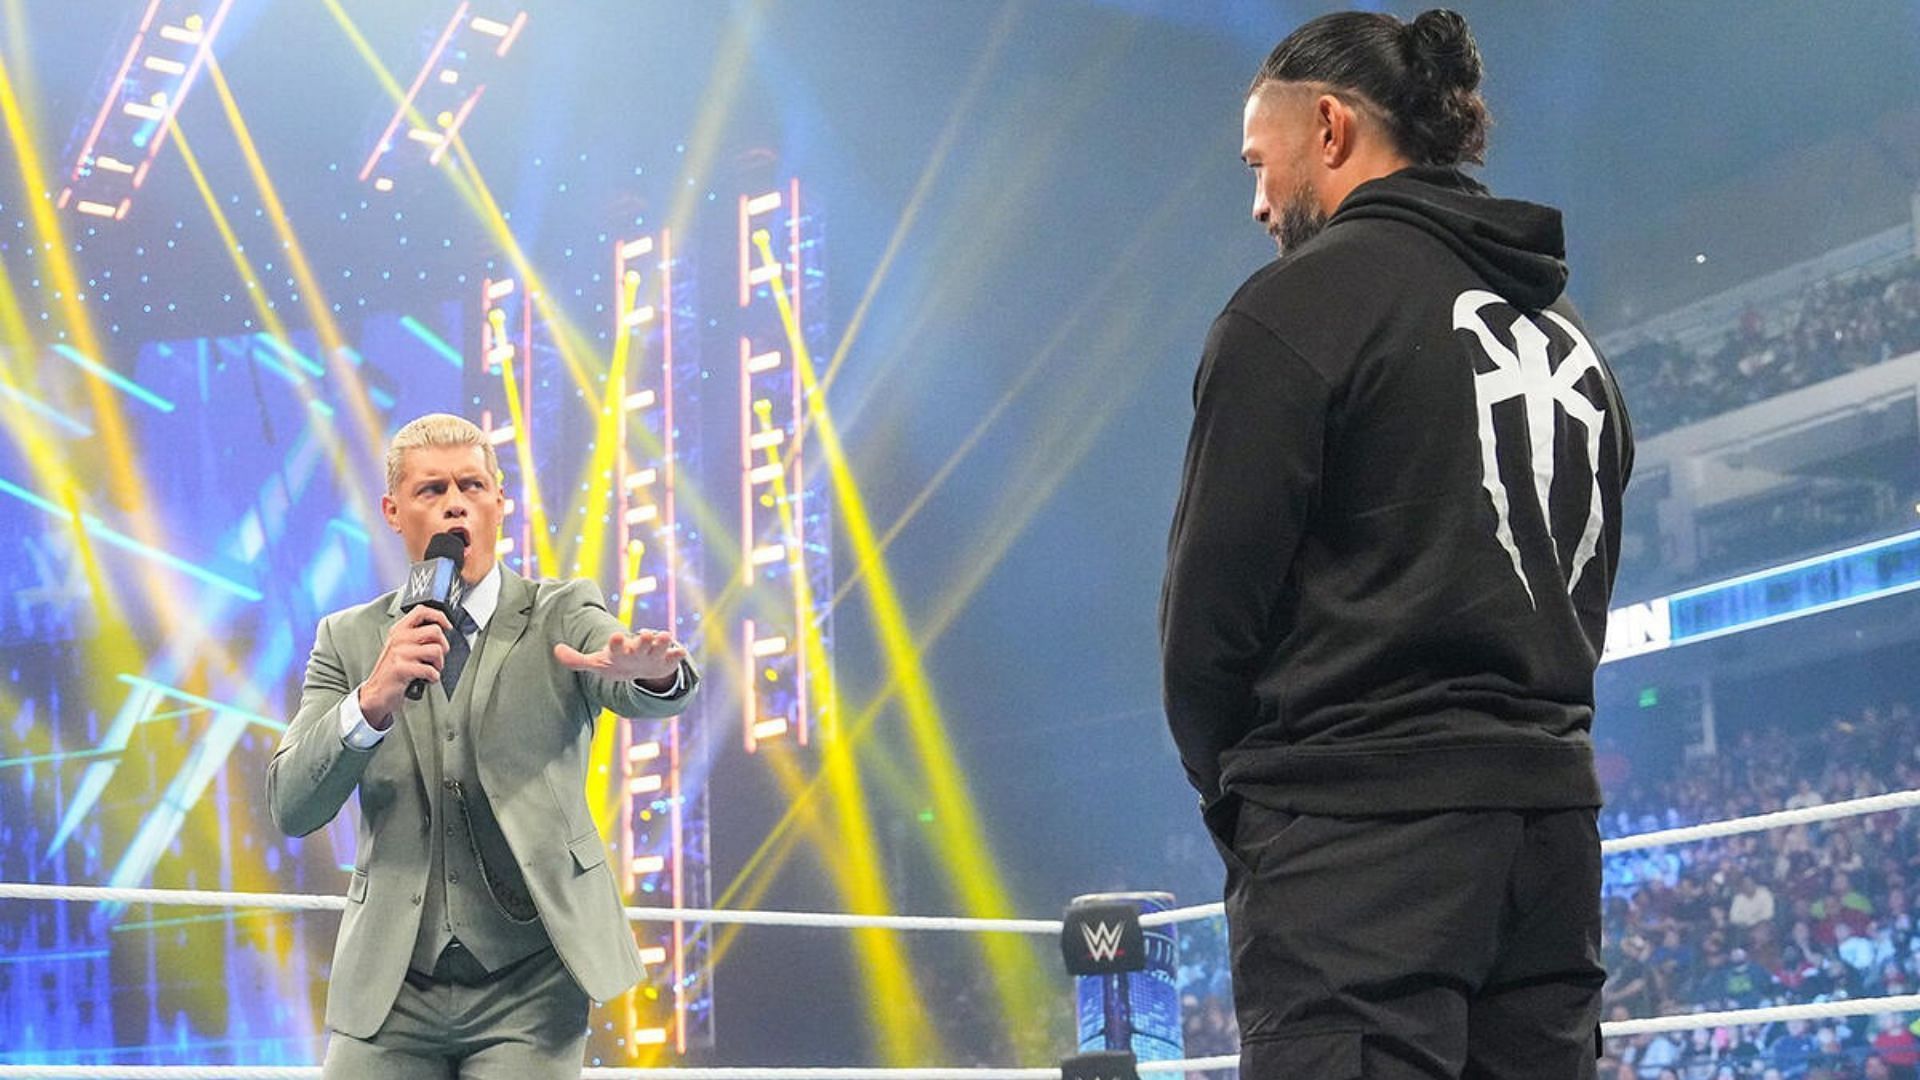 Cody Rhodes and Roman Reigns will face one another in the main event of WrestleMania XL [Photo courtesy of WWE